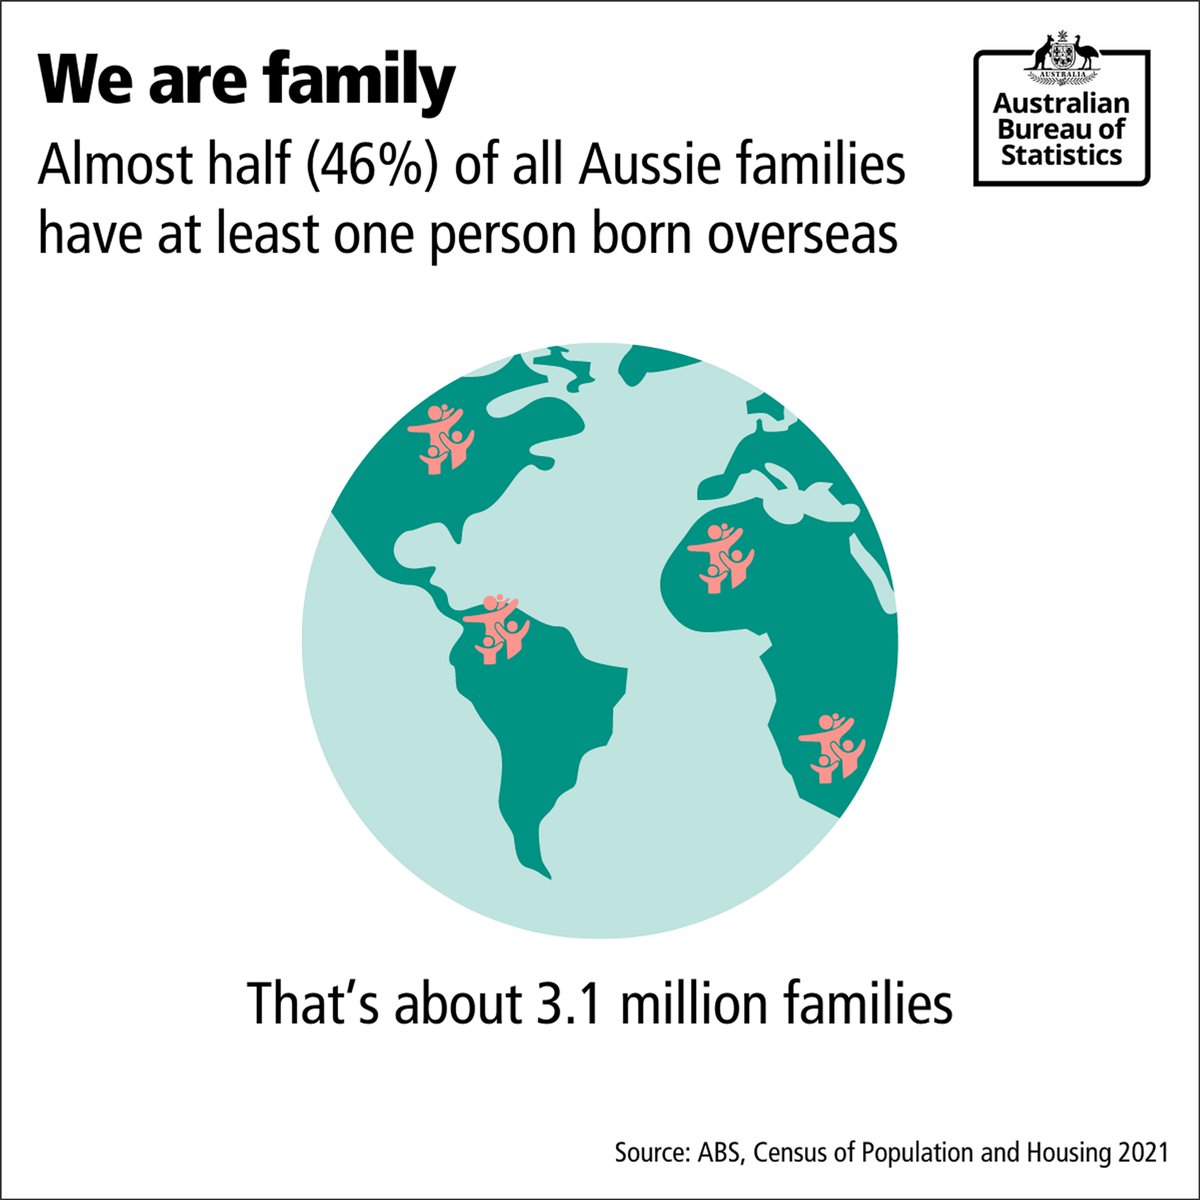 Today is International Day of Families! This year's theme is embracing diversity, strengthening families. Almost half of all Aussie families have at least one person born overseas! 👨‍👩‍👧‍👦👩‍👩‍👦👨‍👧🌏️